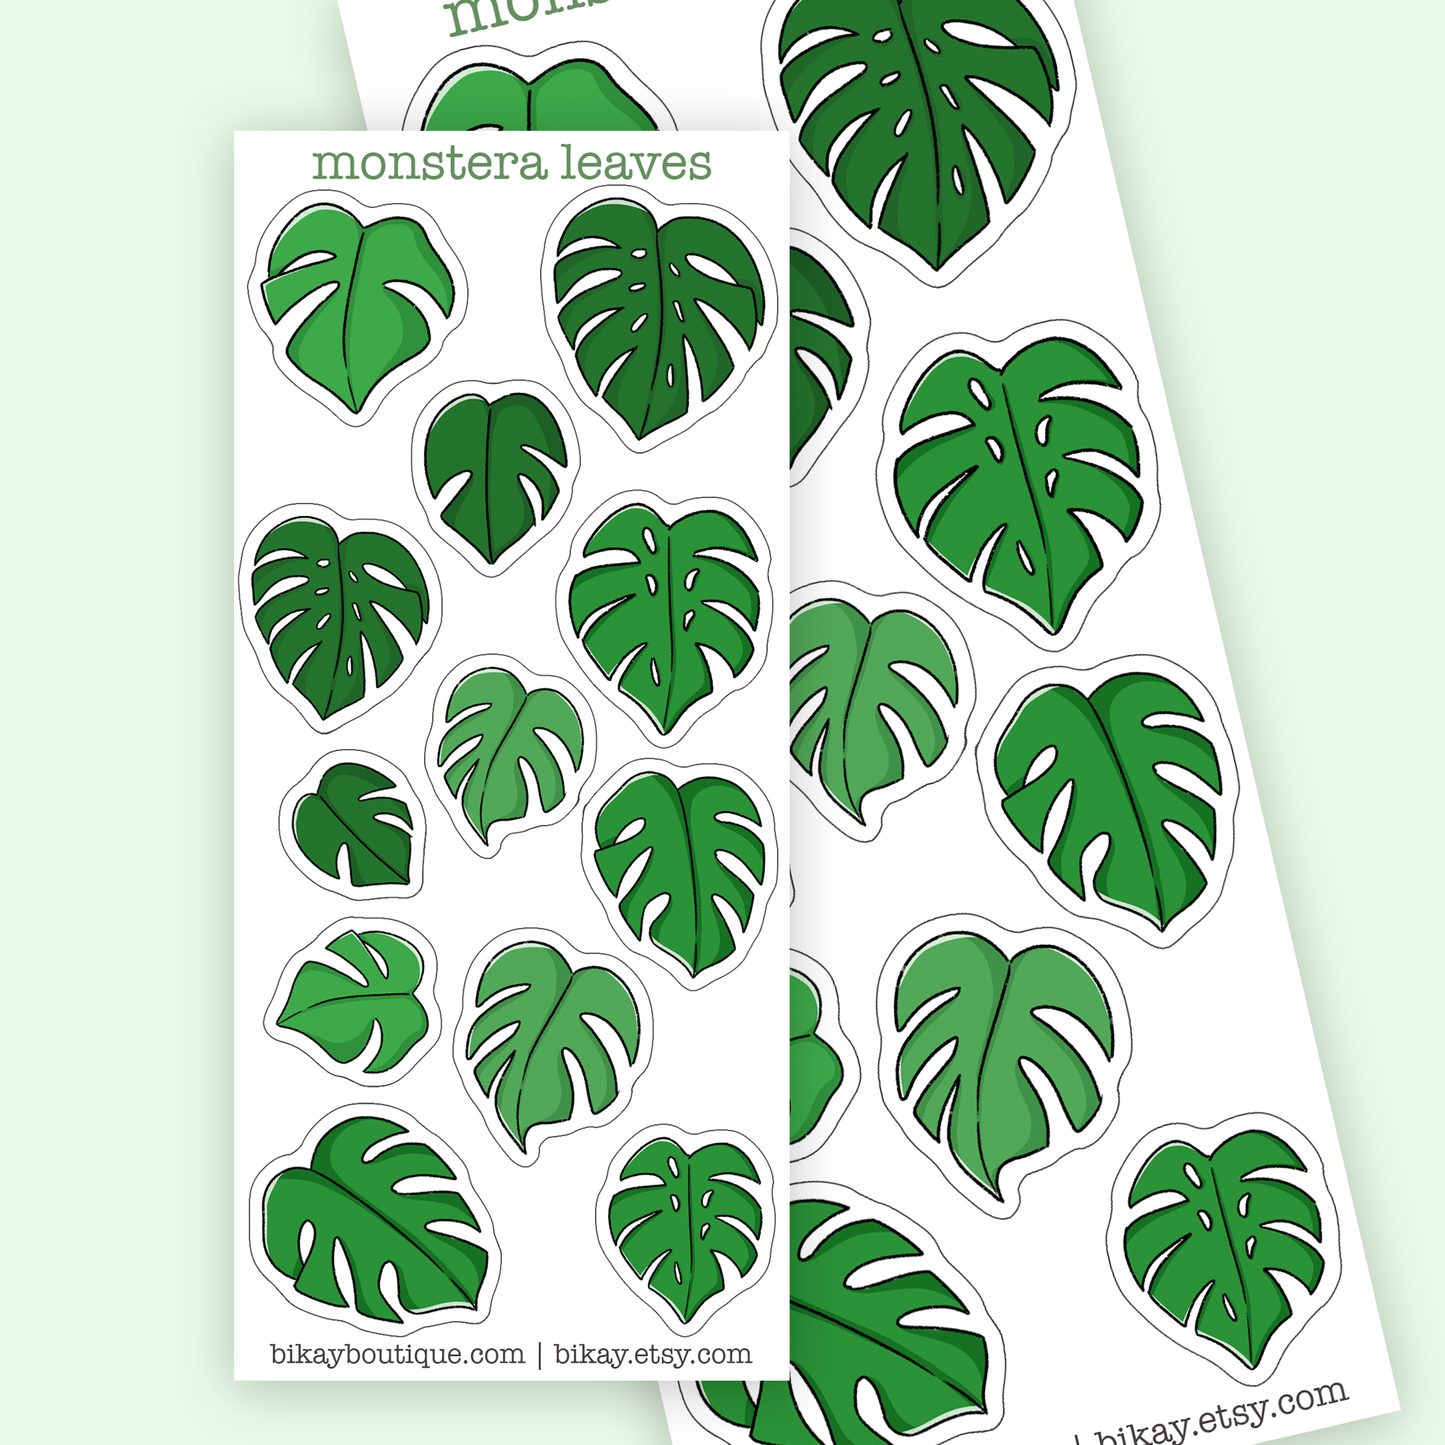 Monstera leaves stickers